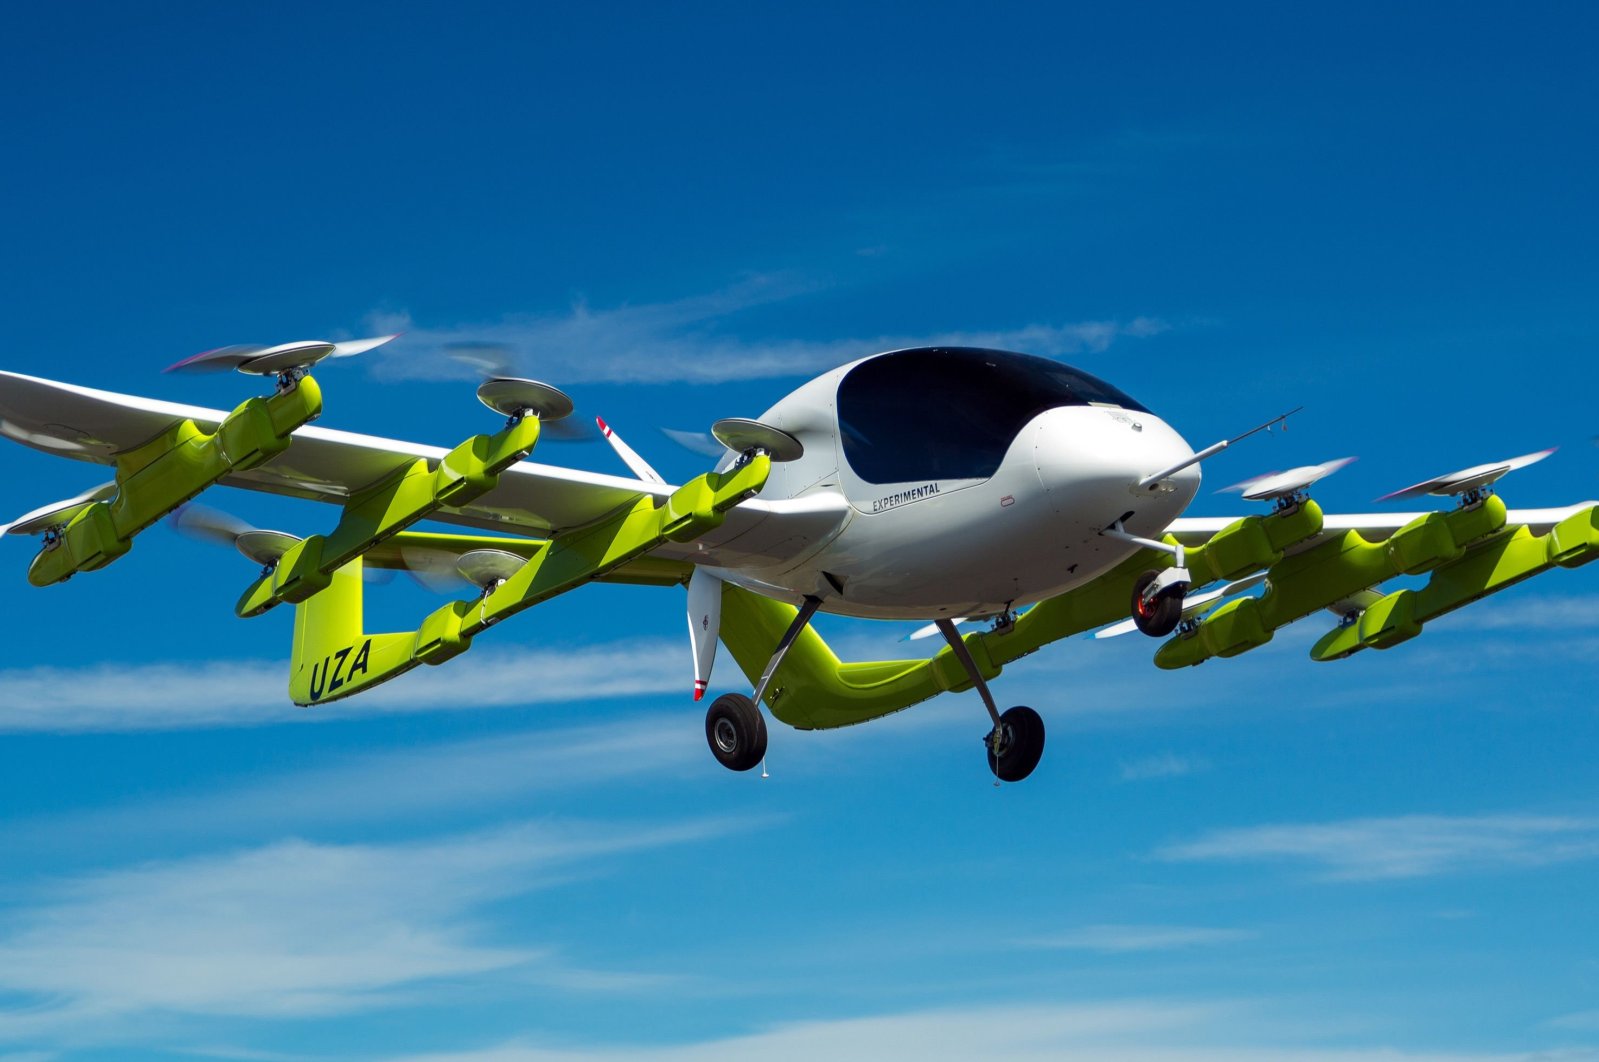 A "CORA" electric-powered air taxi is seen inflight in this handout picture from New Zealand based aviation company Zephyr Airworks on March 13, 2018. (AFP Photo)